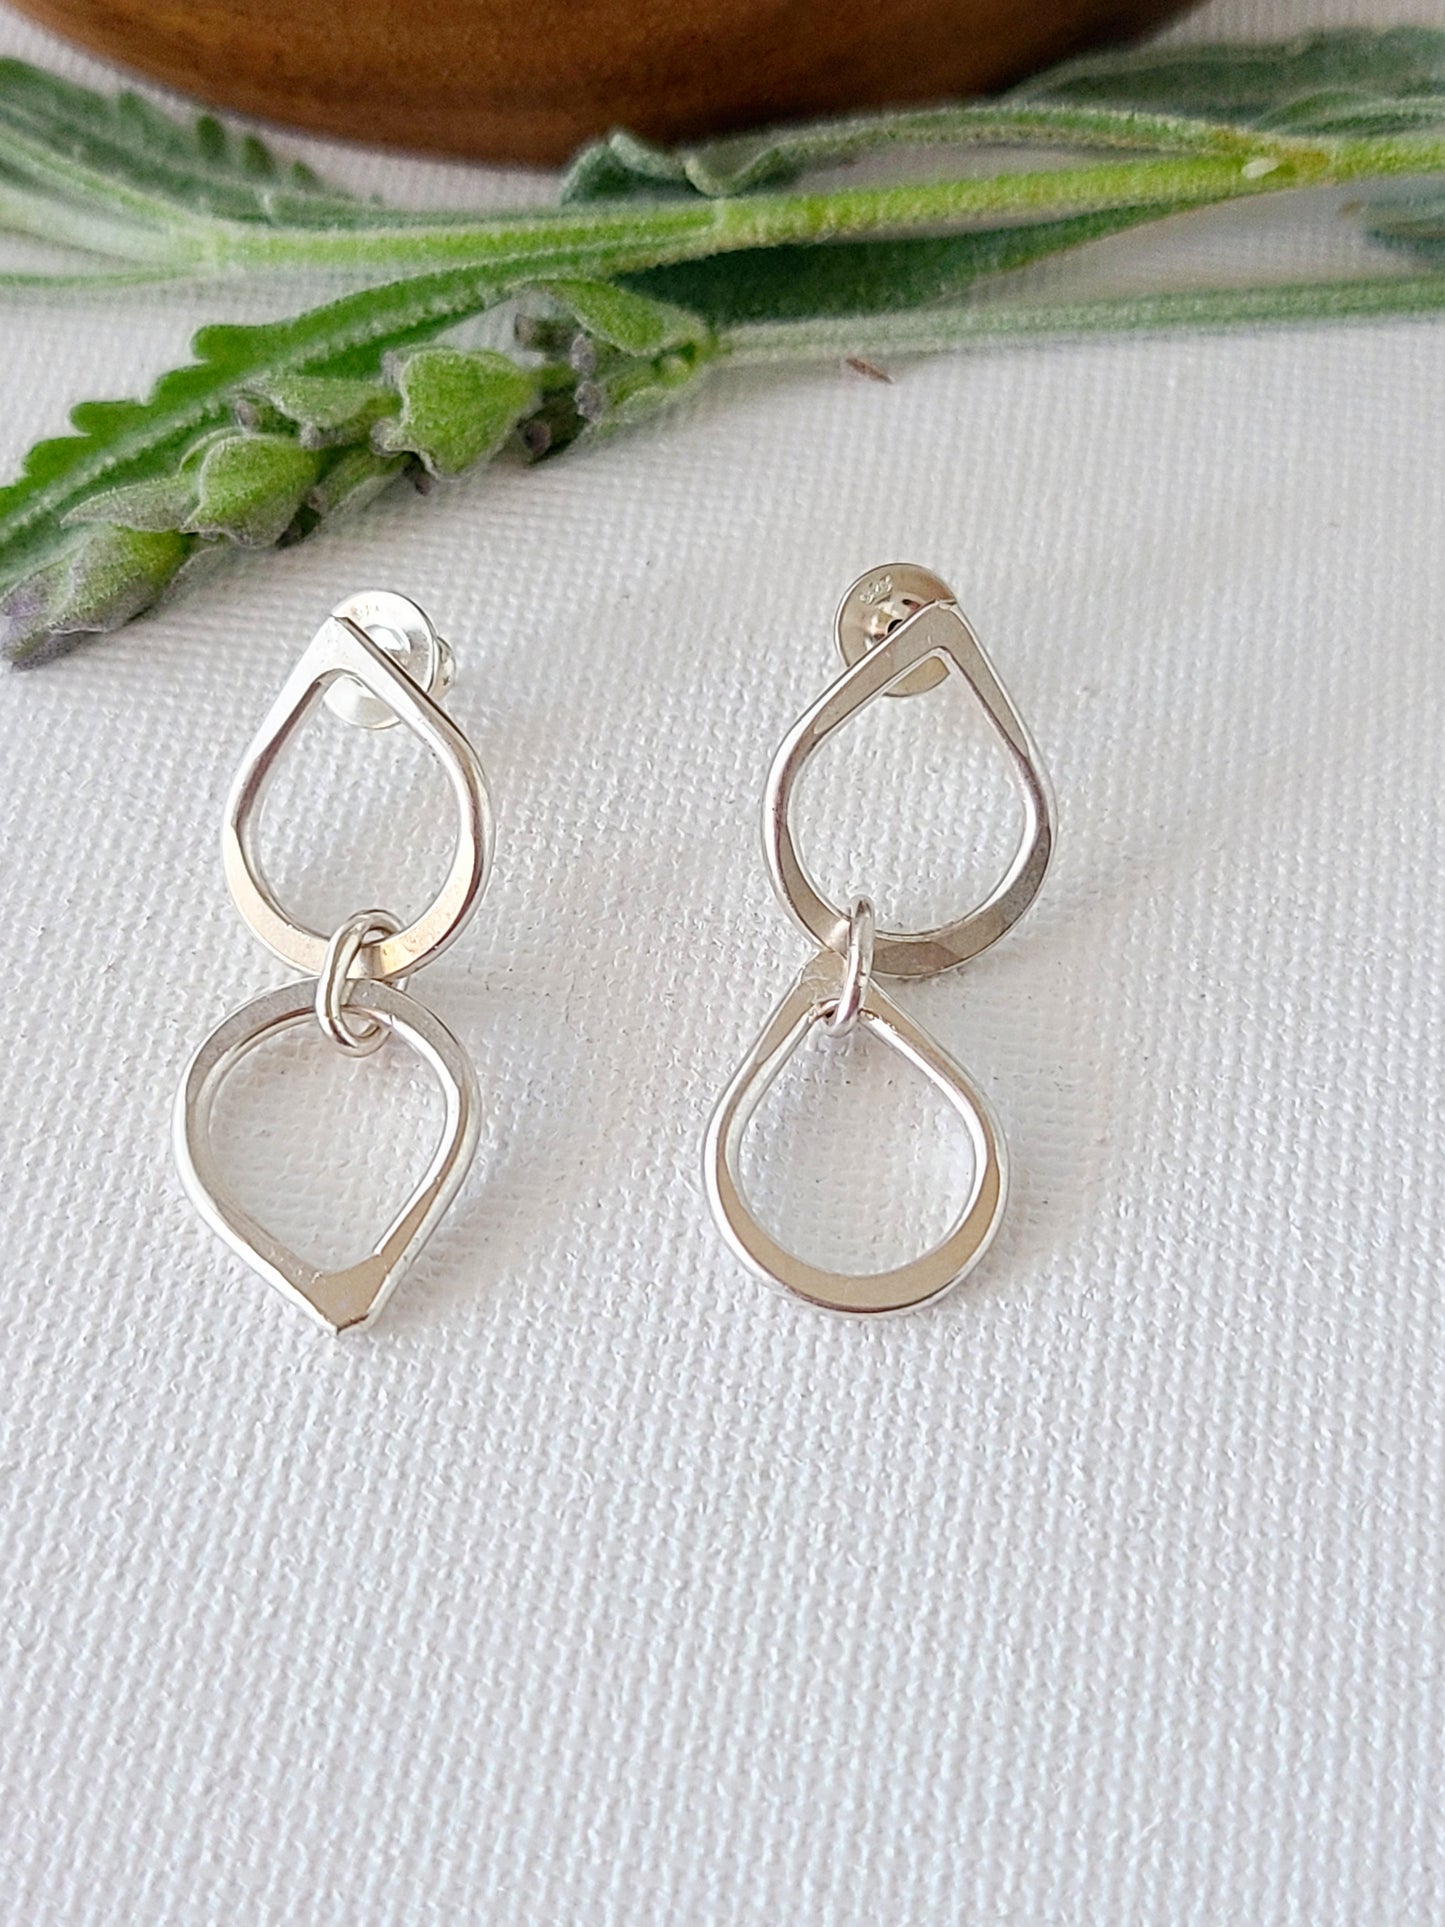 Silver Leaf Earrings with 2 drops-Dangle or Stud